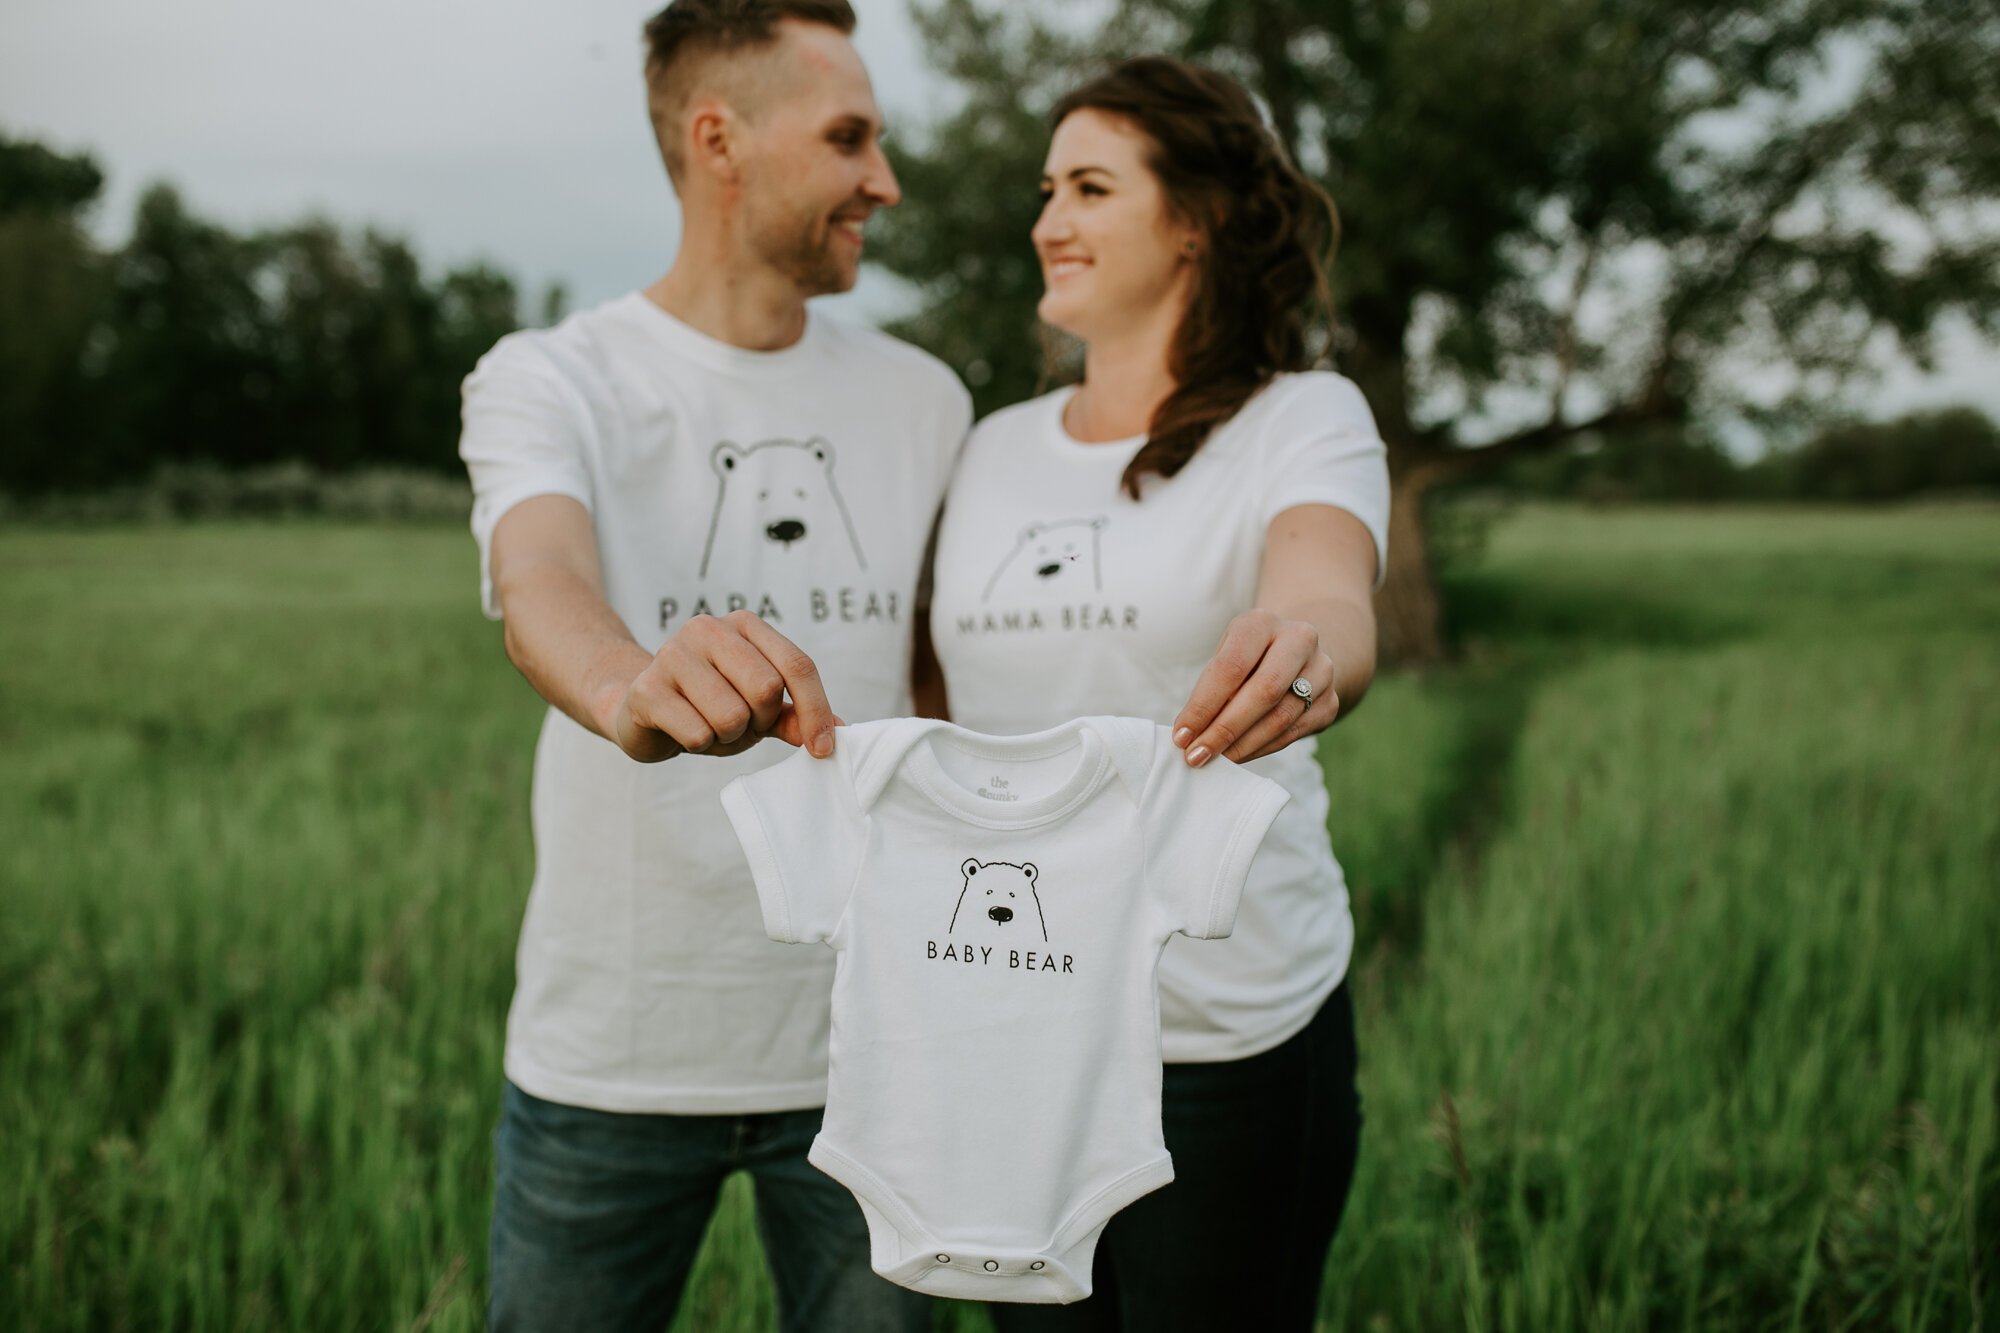  I went into this shoot expecting it be a regular engagement session only to find out at the end that these two are going to be parents! How freaking cute are those shirts?! 